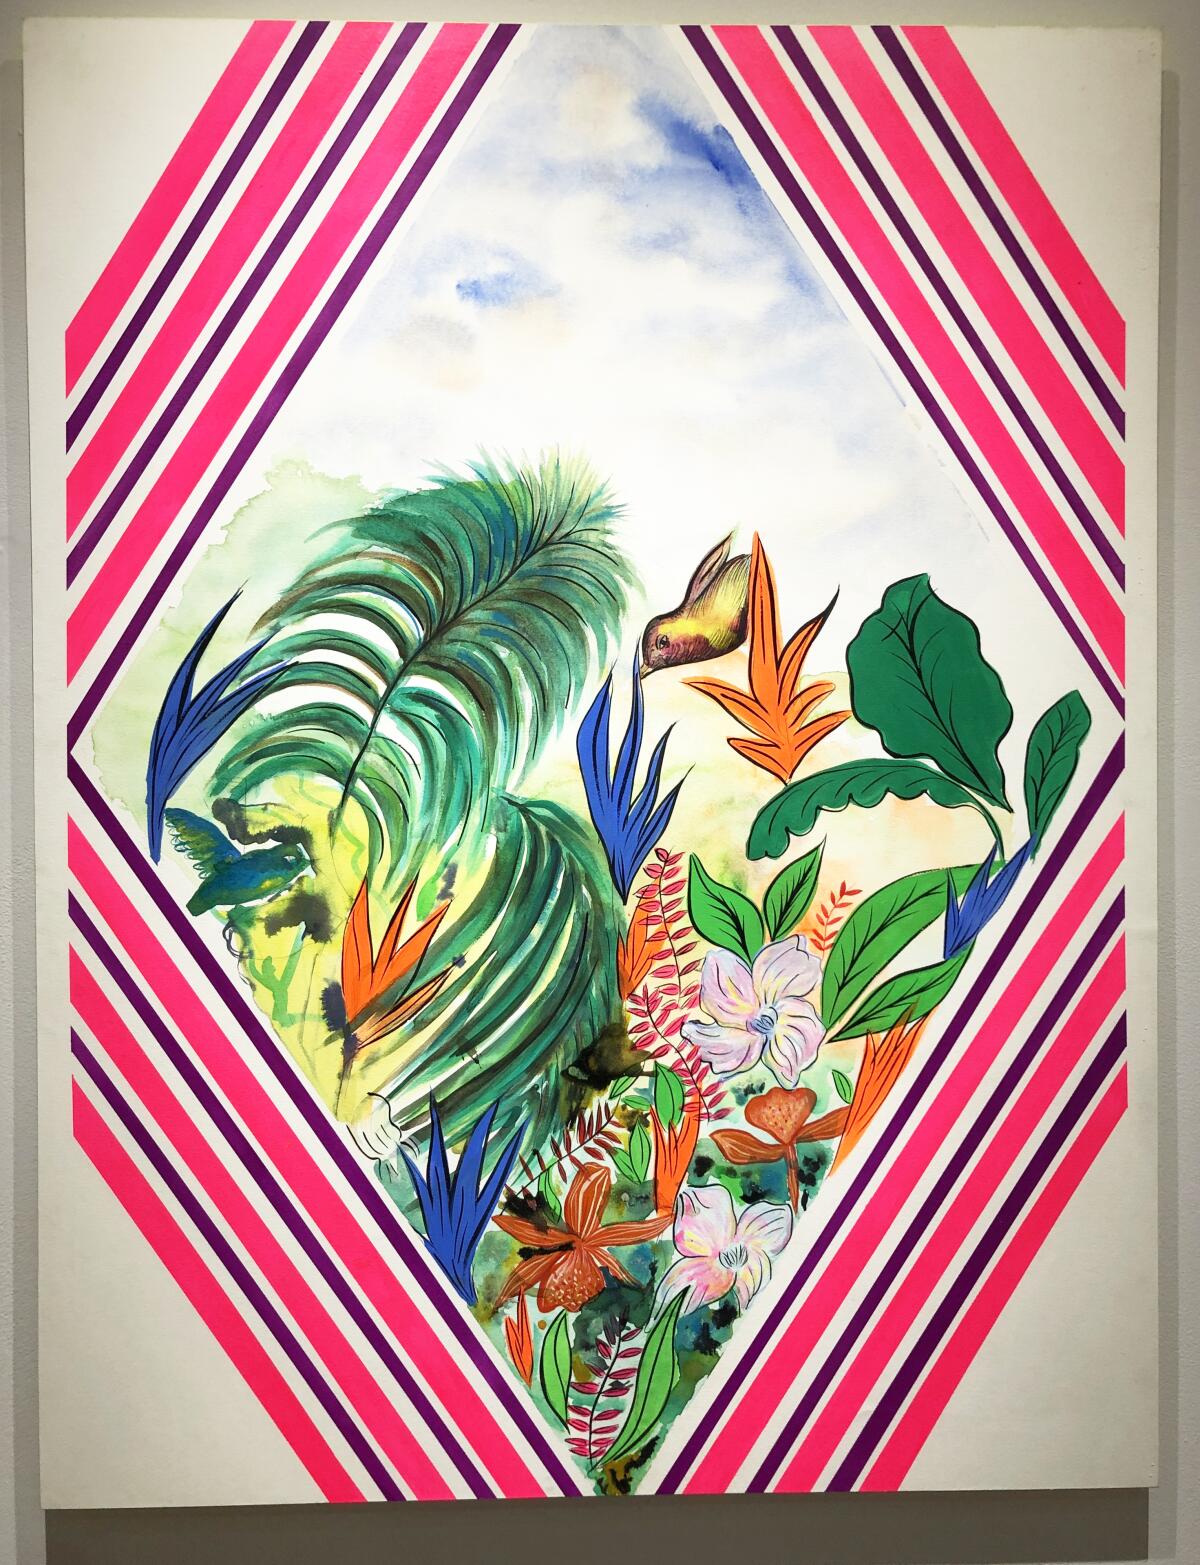 A painting by Carolyn Casta?o features a tropical scene surrounded by bright bands of color